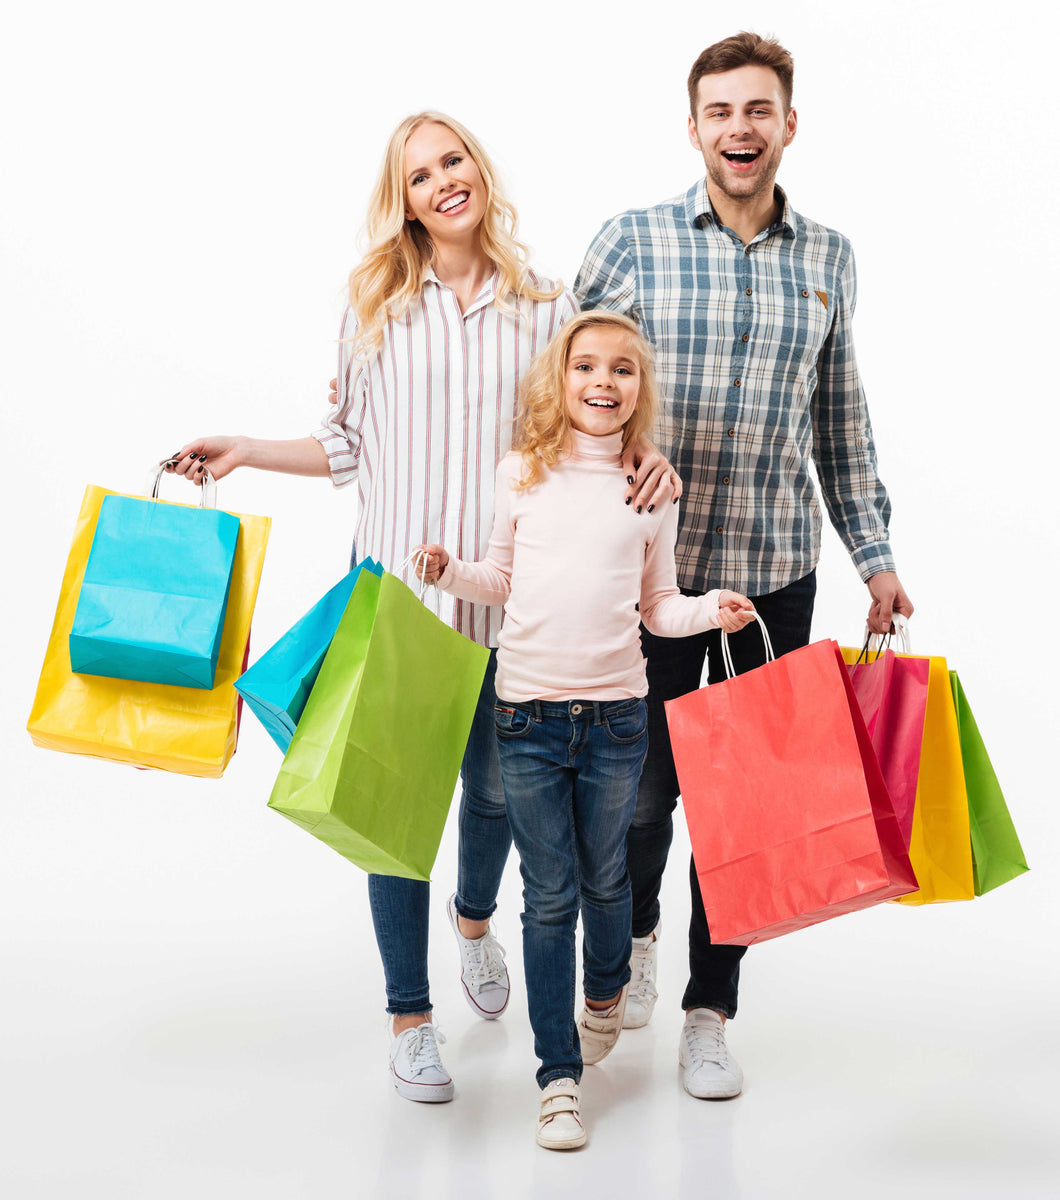 Shop online in usa from various category stores such as auto parts, women fashion, electronics, sports & outdoor, furniture, men's fashion and health & beauty. The USA Plaza brought everything under one roof. Have the best quality products in USA